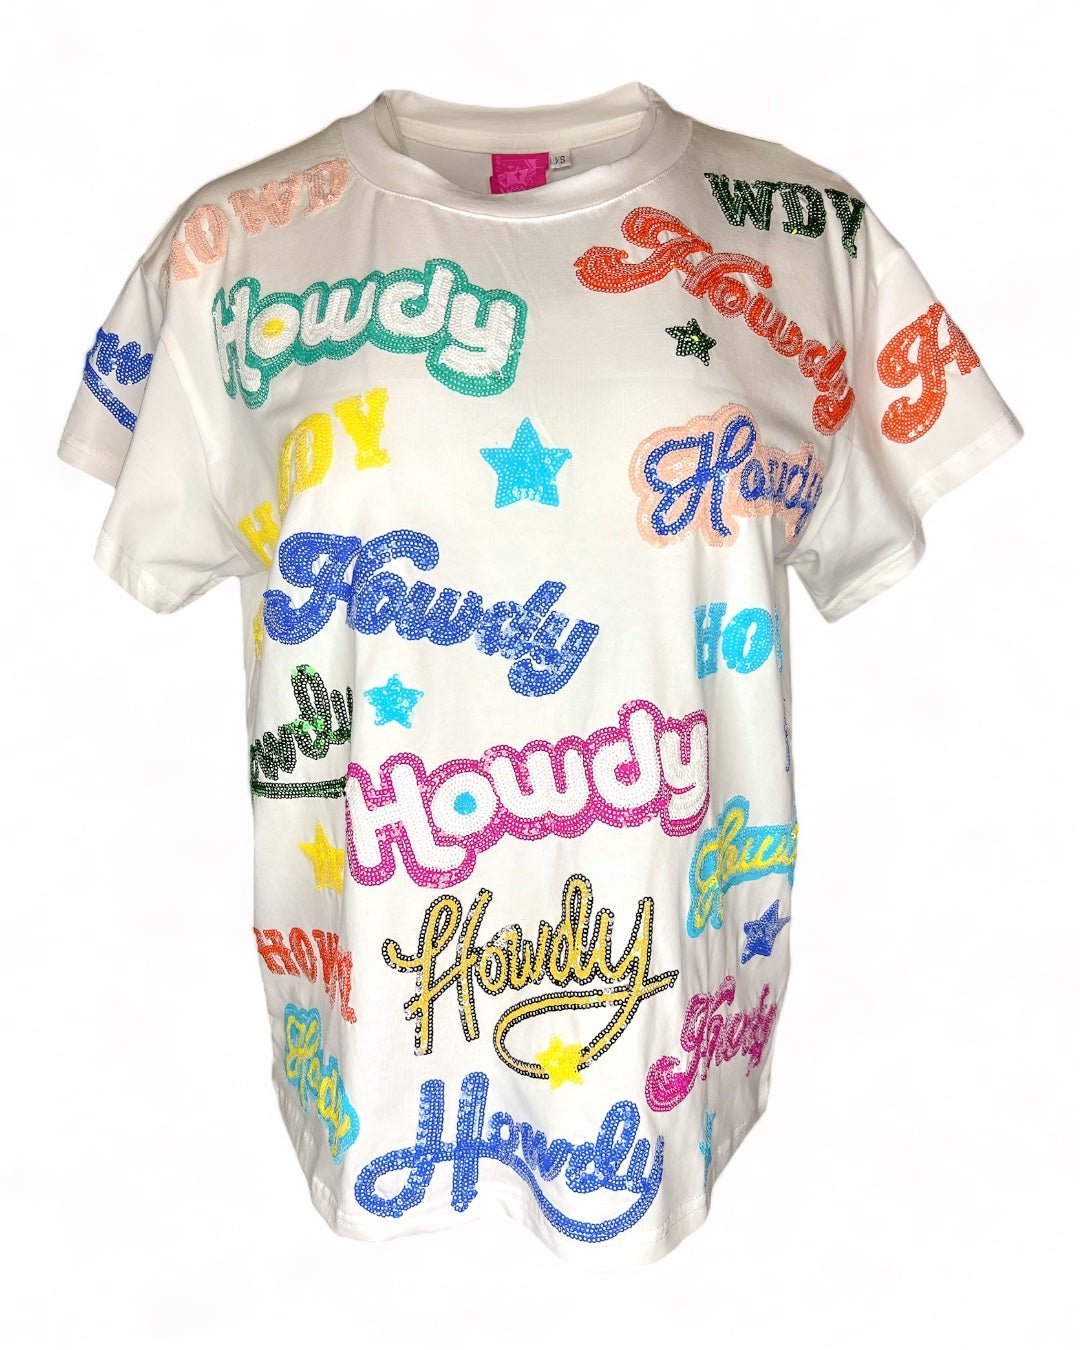 Howdy All Over Tee - Frock Shop